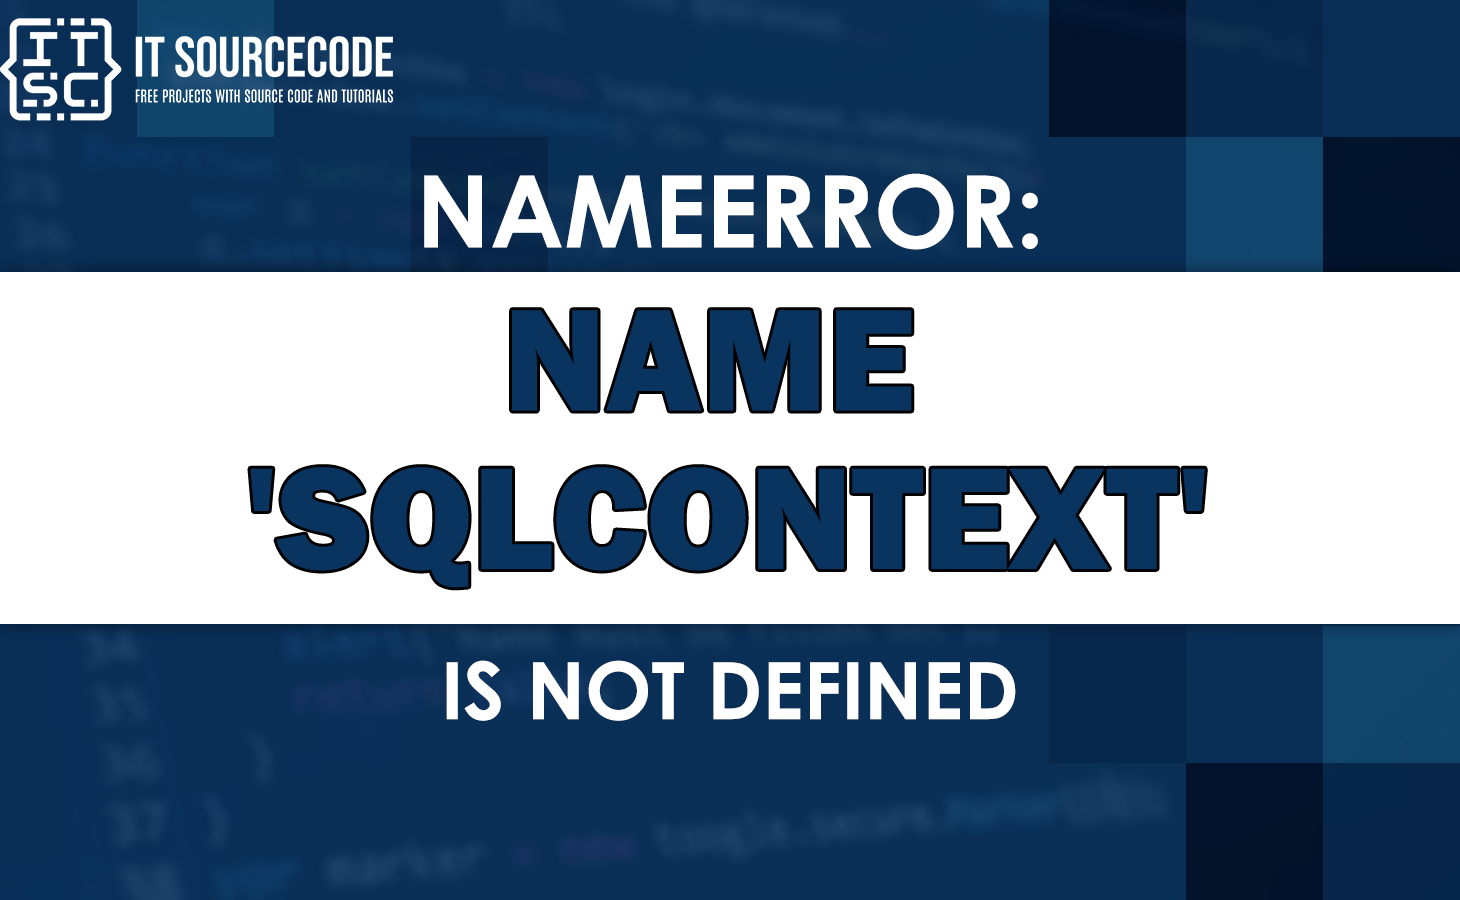 Nameerror: name 'sqlcontext' is not defined